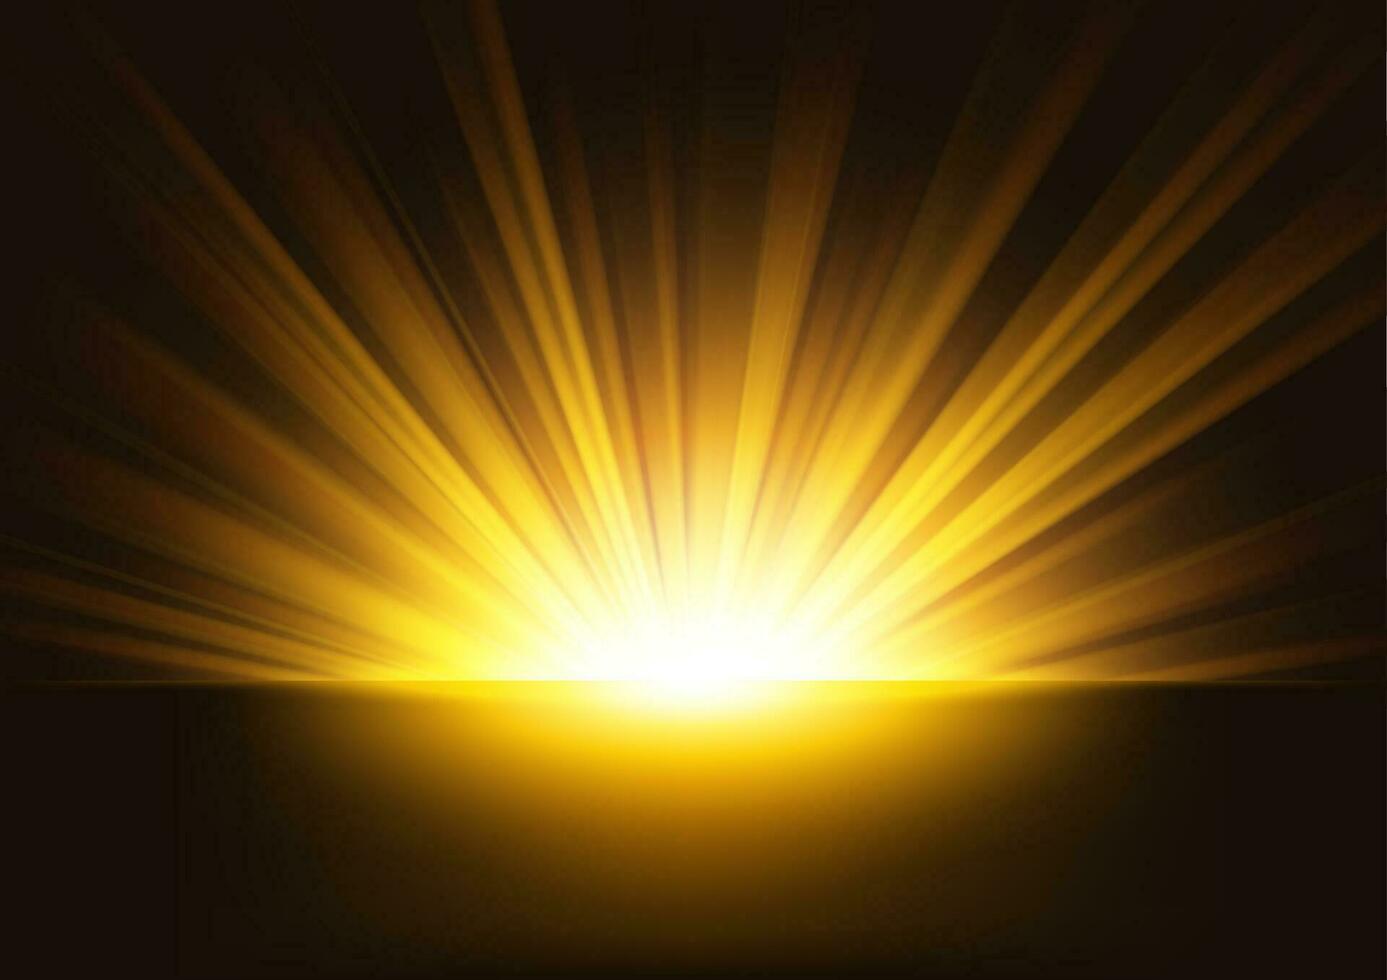 Gold Rays Rising on Dark Background. Suitable For Product Advertising, Product Design, and Other., Vector Illustration